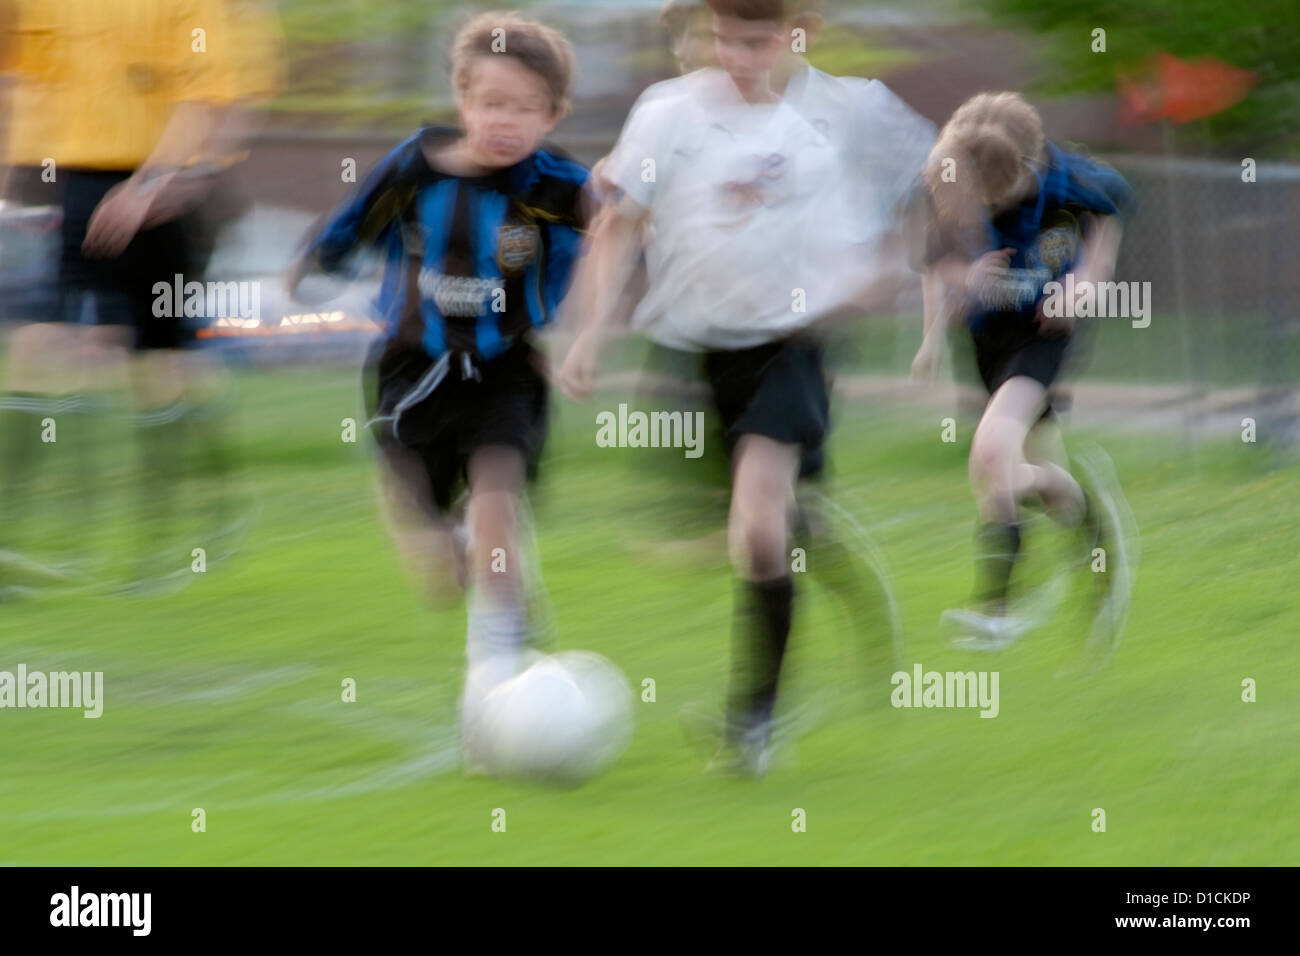 Boys age 10 playing soccer game blurred to show action. Monroe Memorial Park St Paul Minnesota MN USA Stock Photo